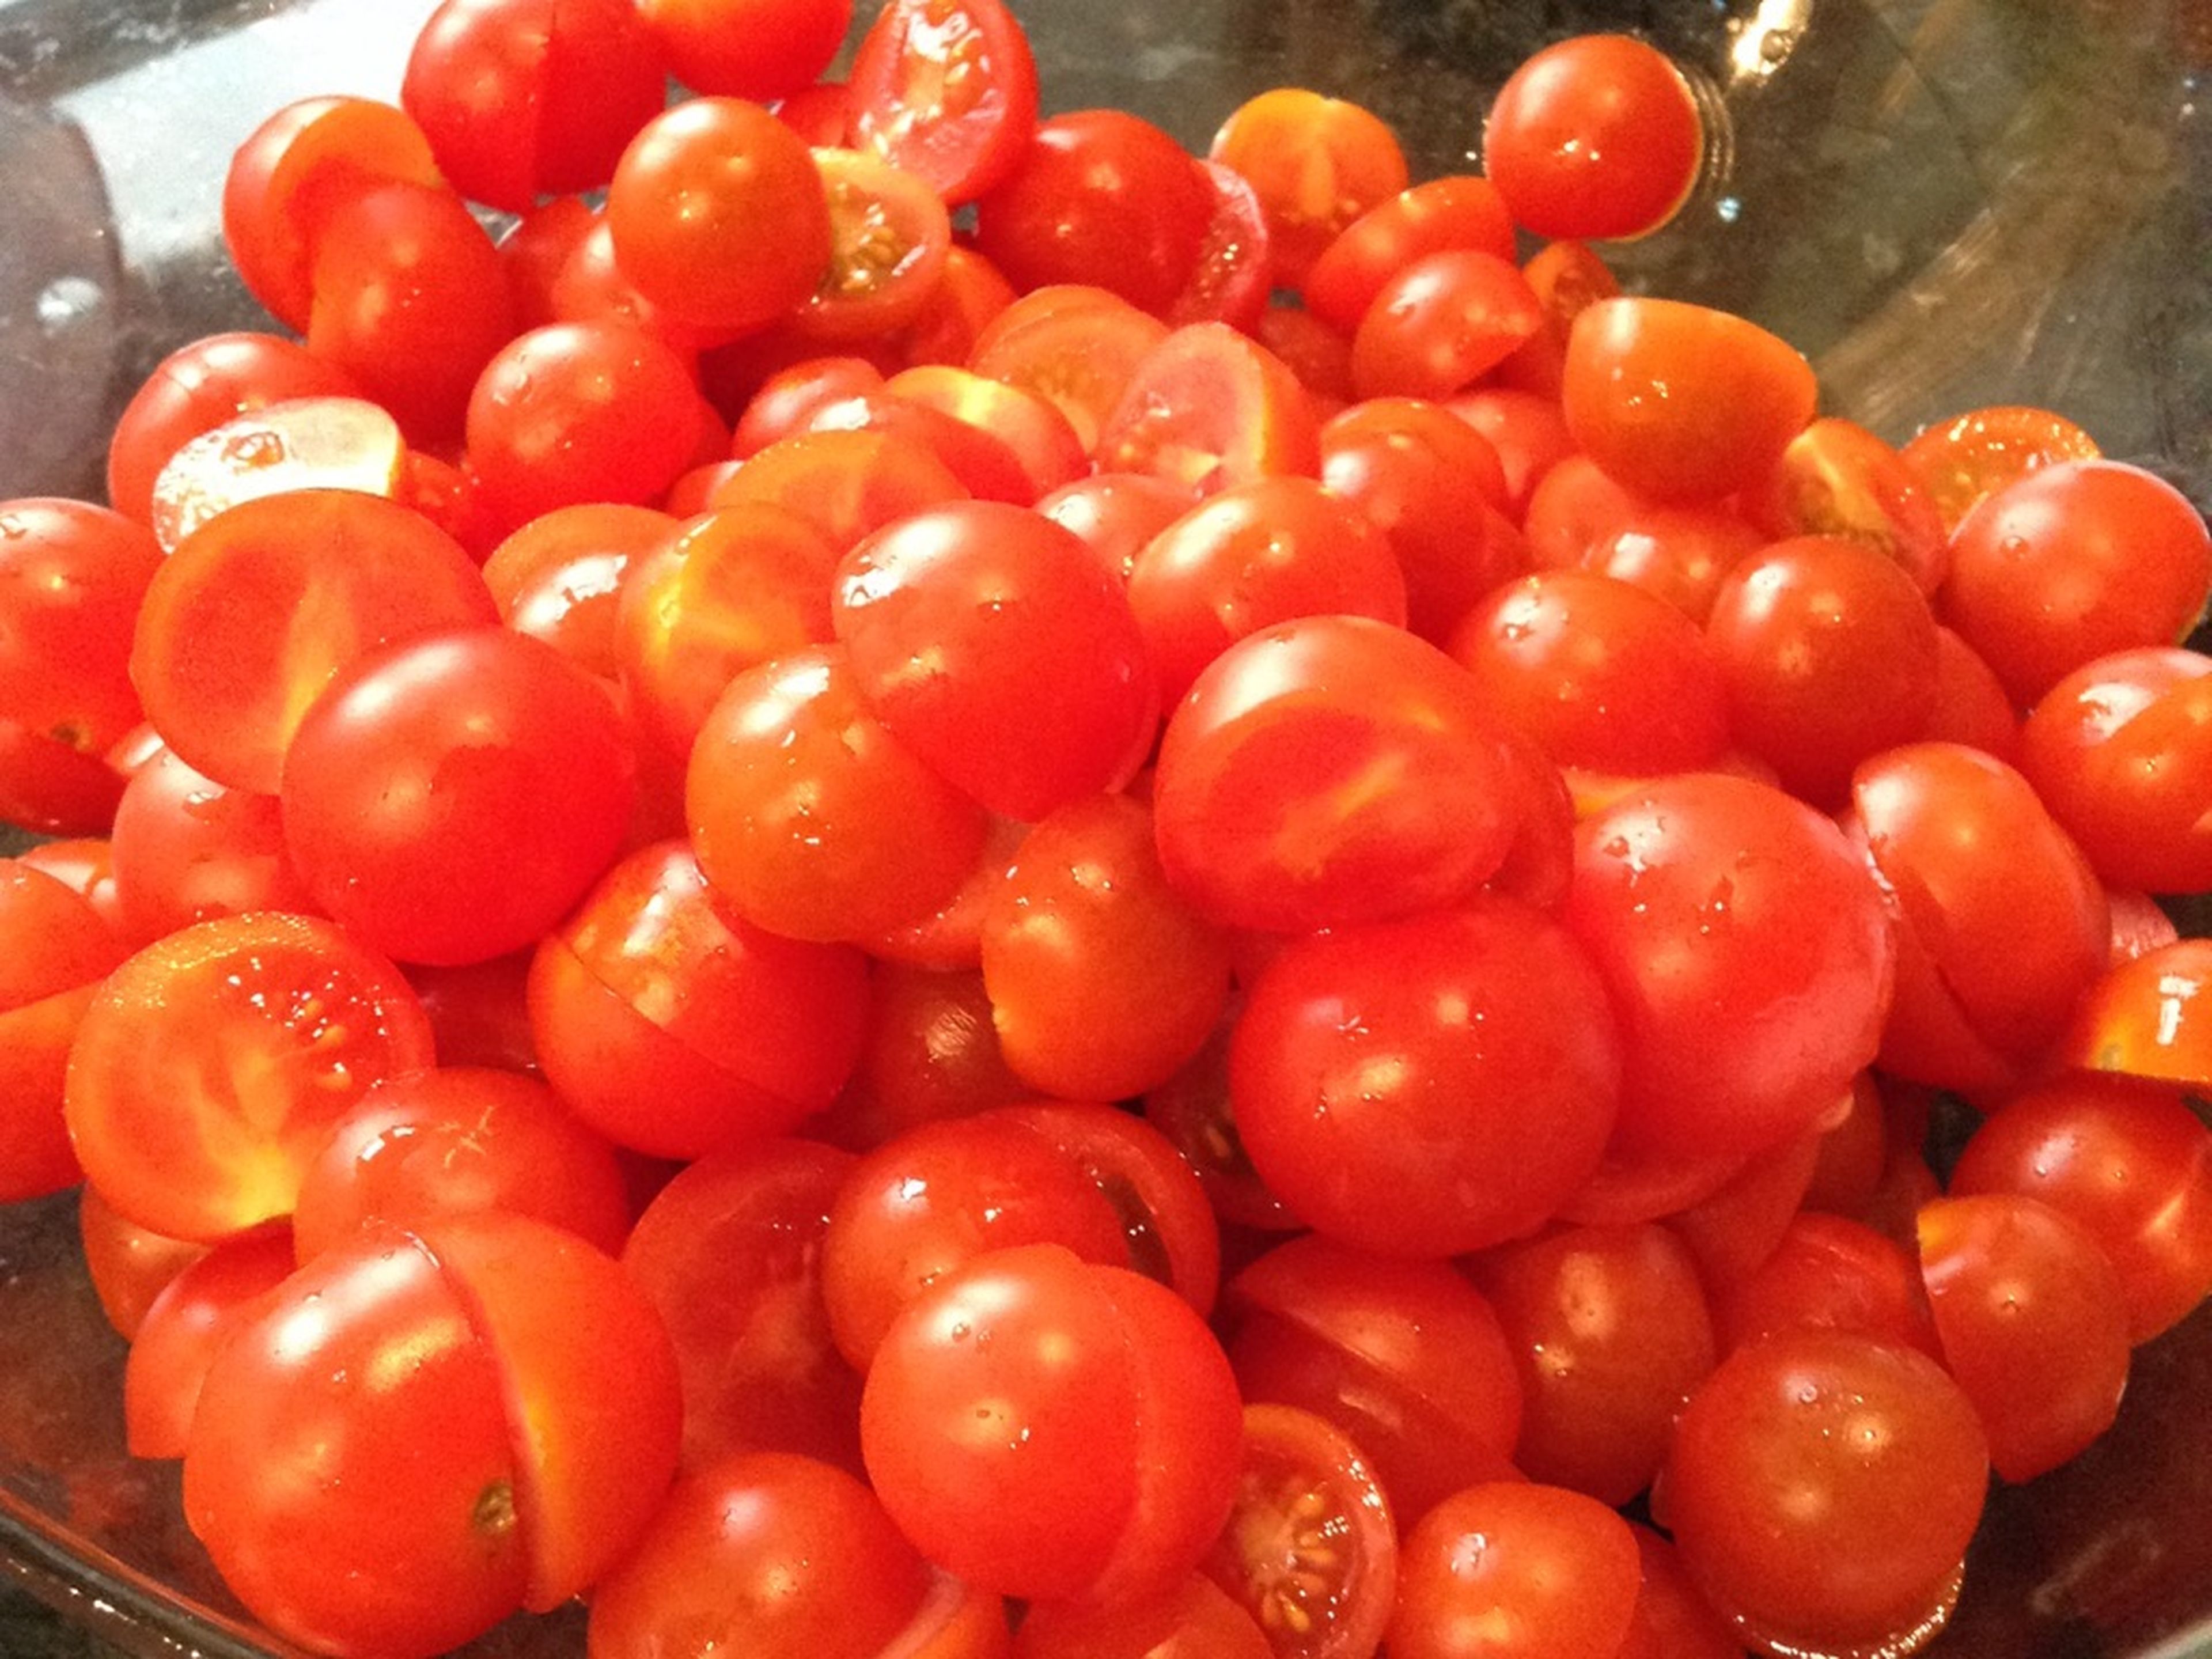 Pre-heat oven to 170°C/340°F. Wash and halve cherry tomatoes.